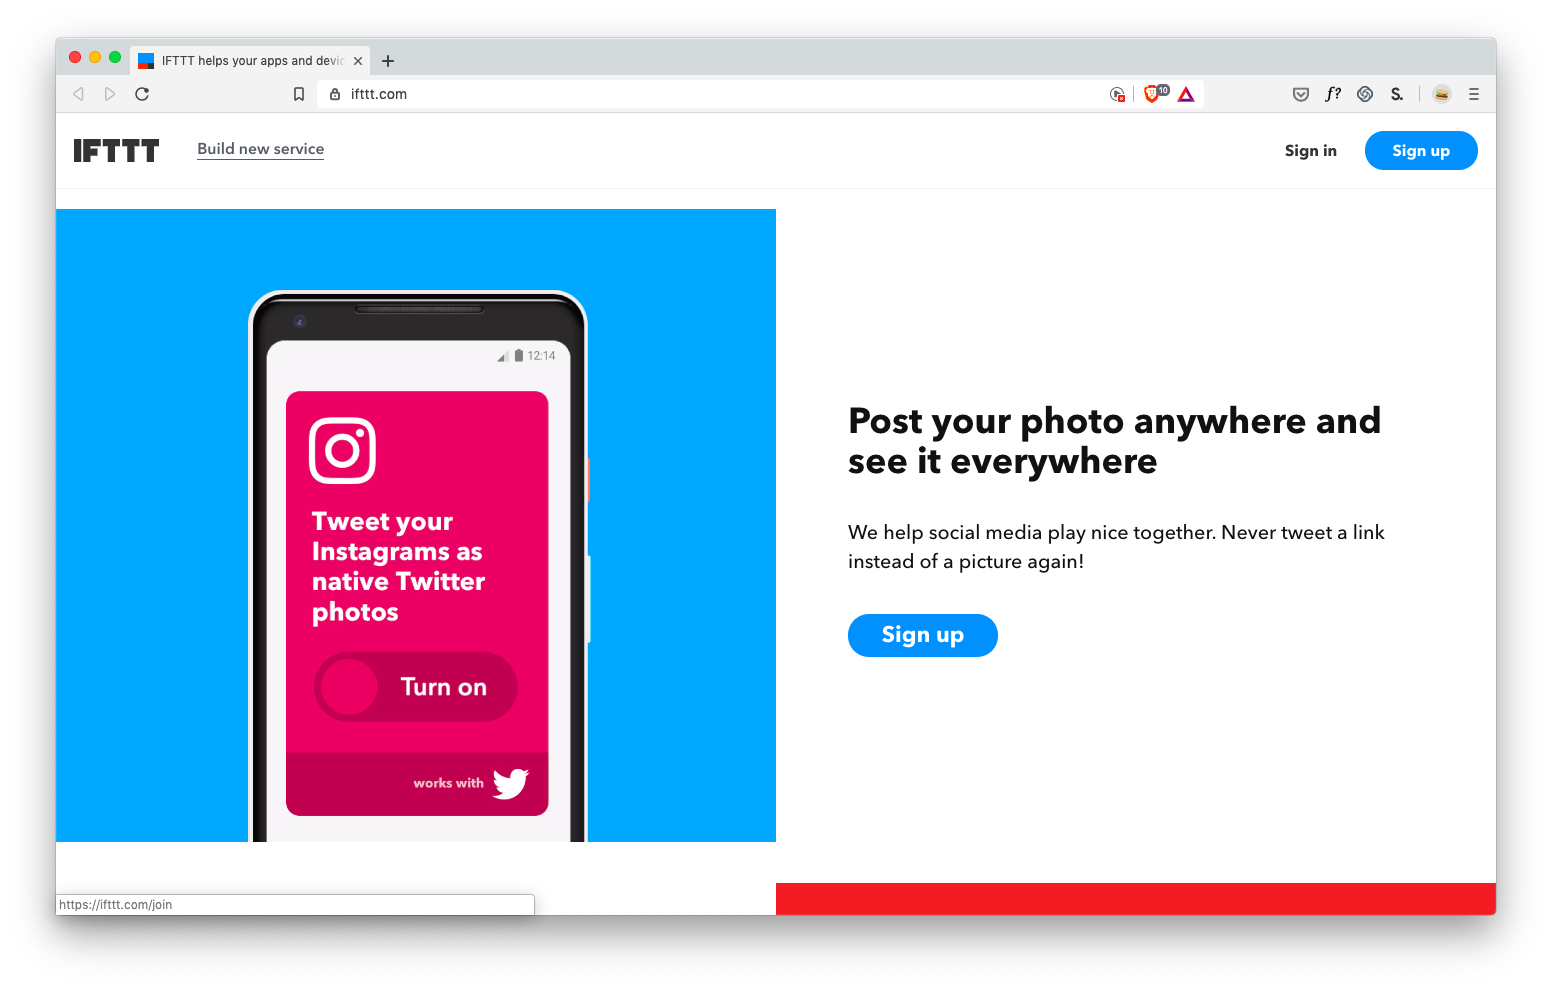 IFTTT UI teaches by example